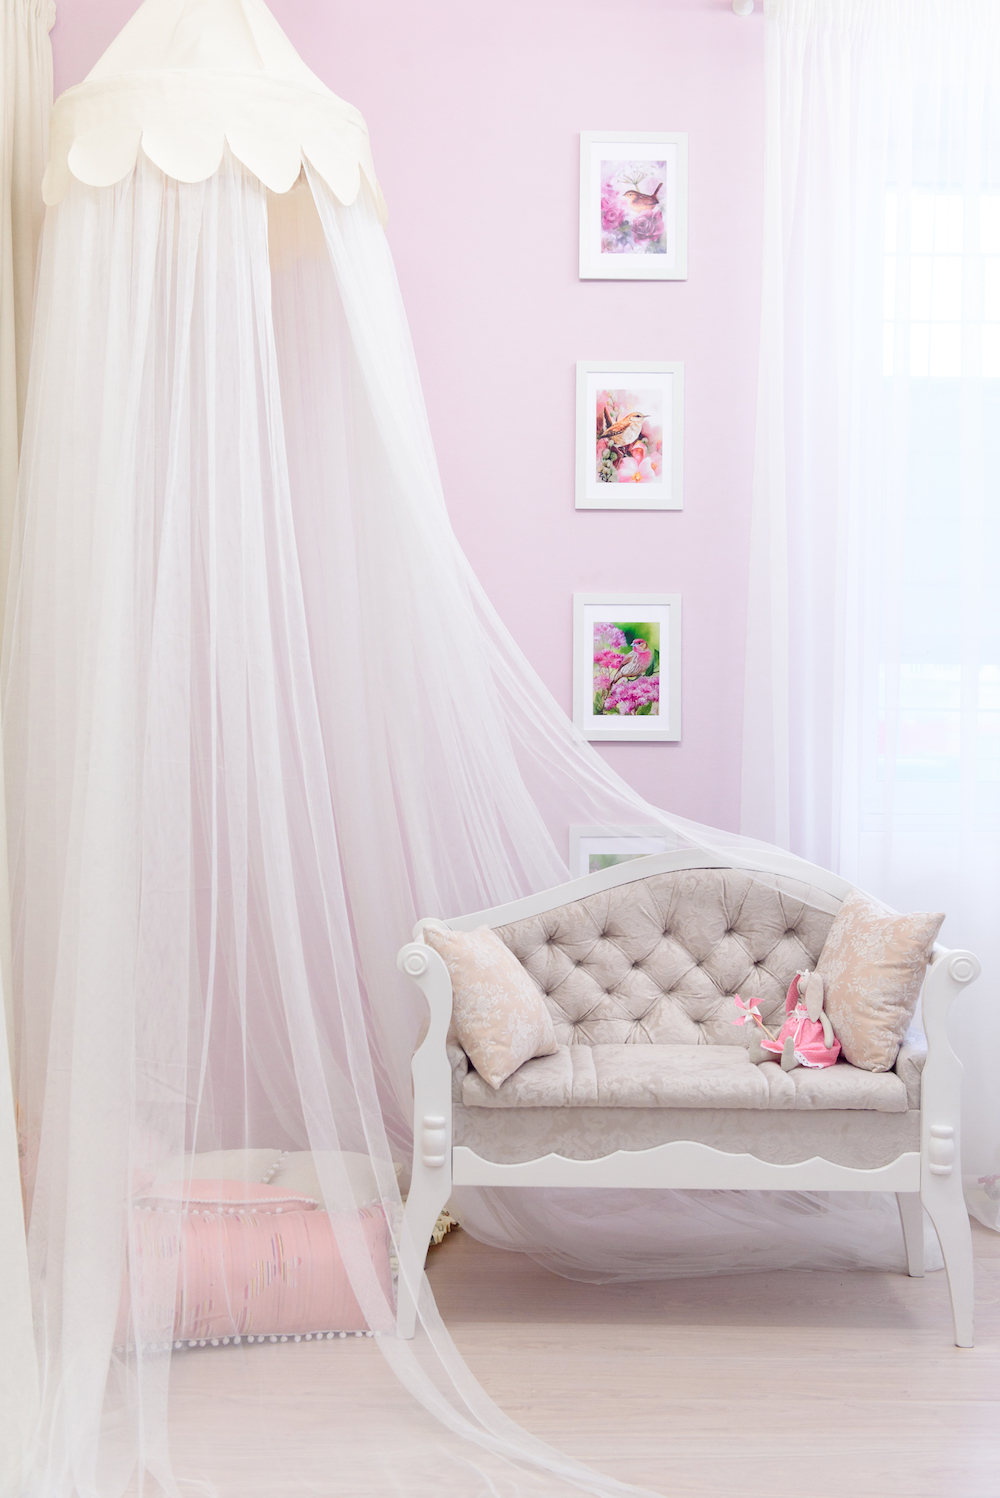 A princess canopy bed is every little girl’s dream